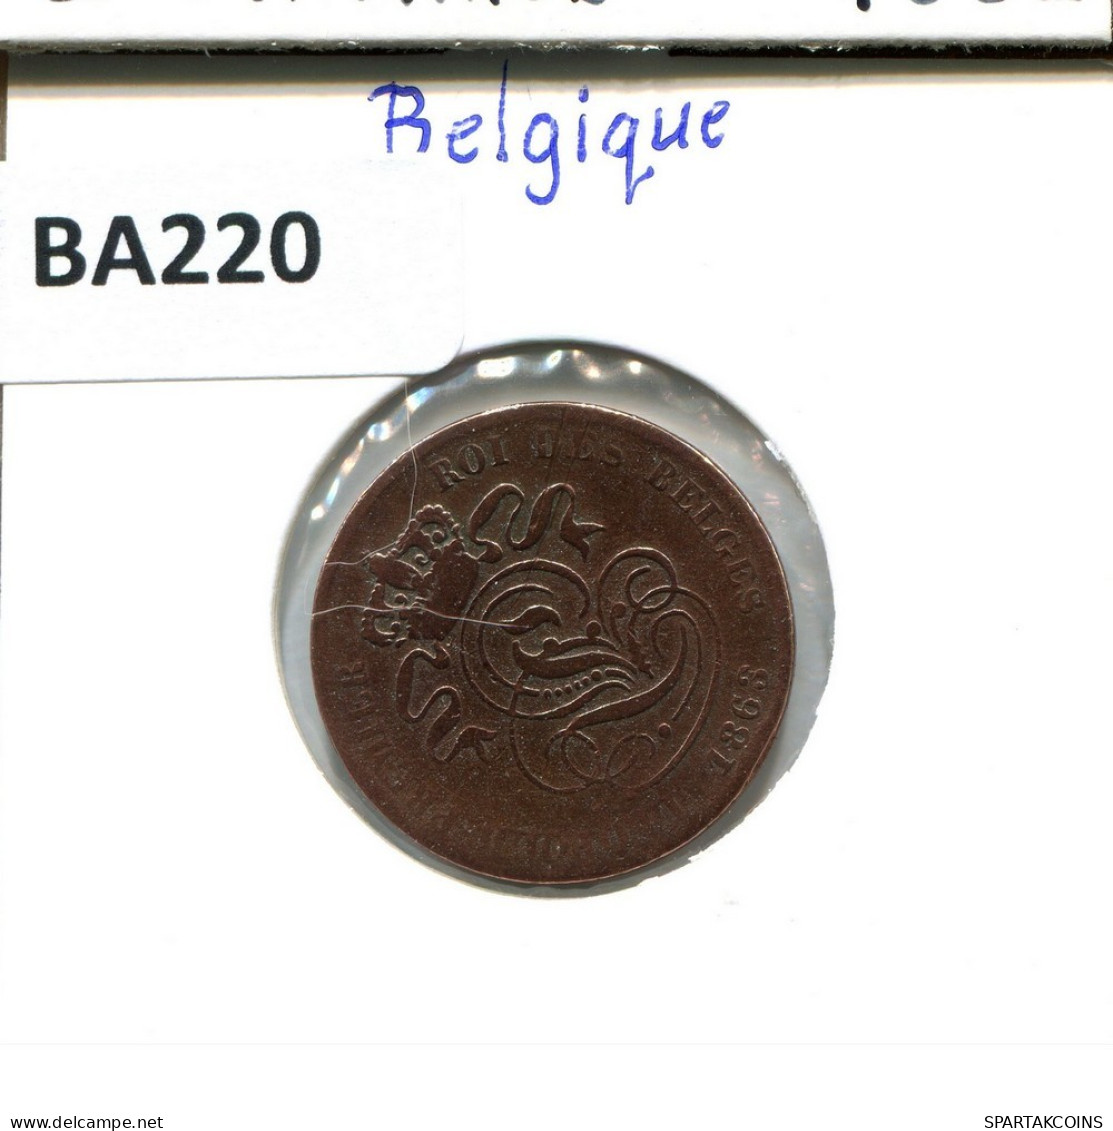 2 CENTIMES 1863 FRENCH Text BELGIUM Coin #BA220.U.A - 2 Cents